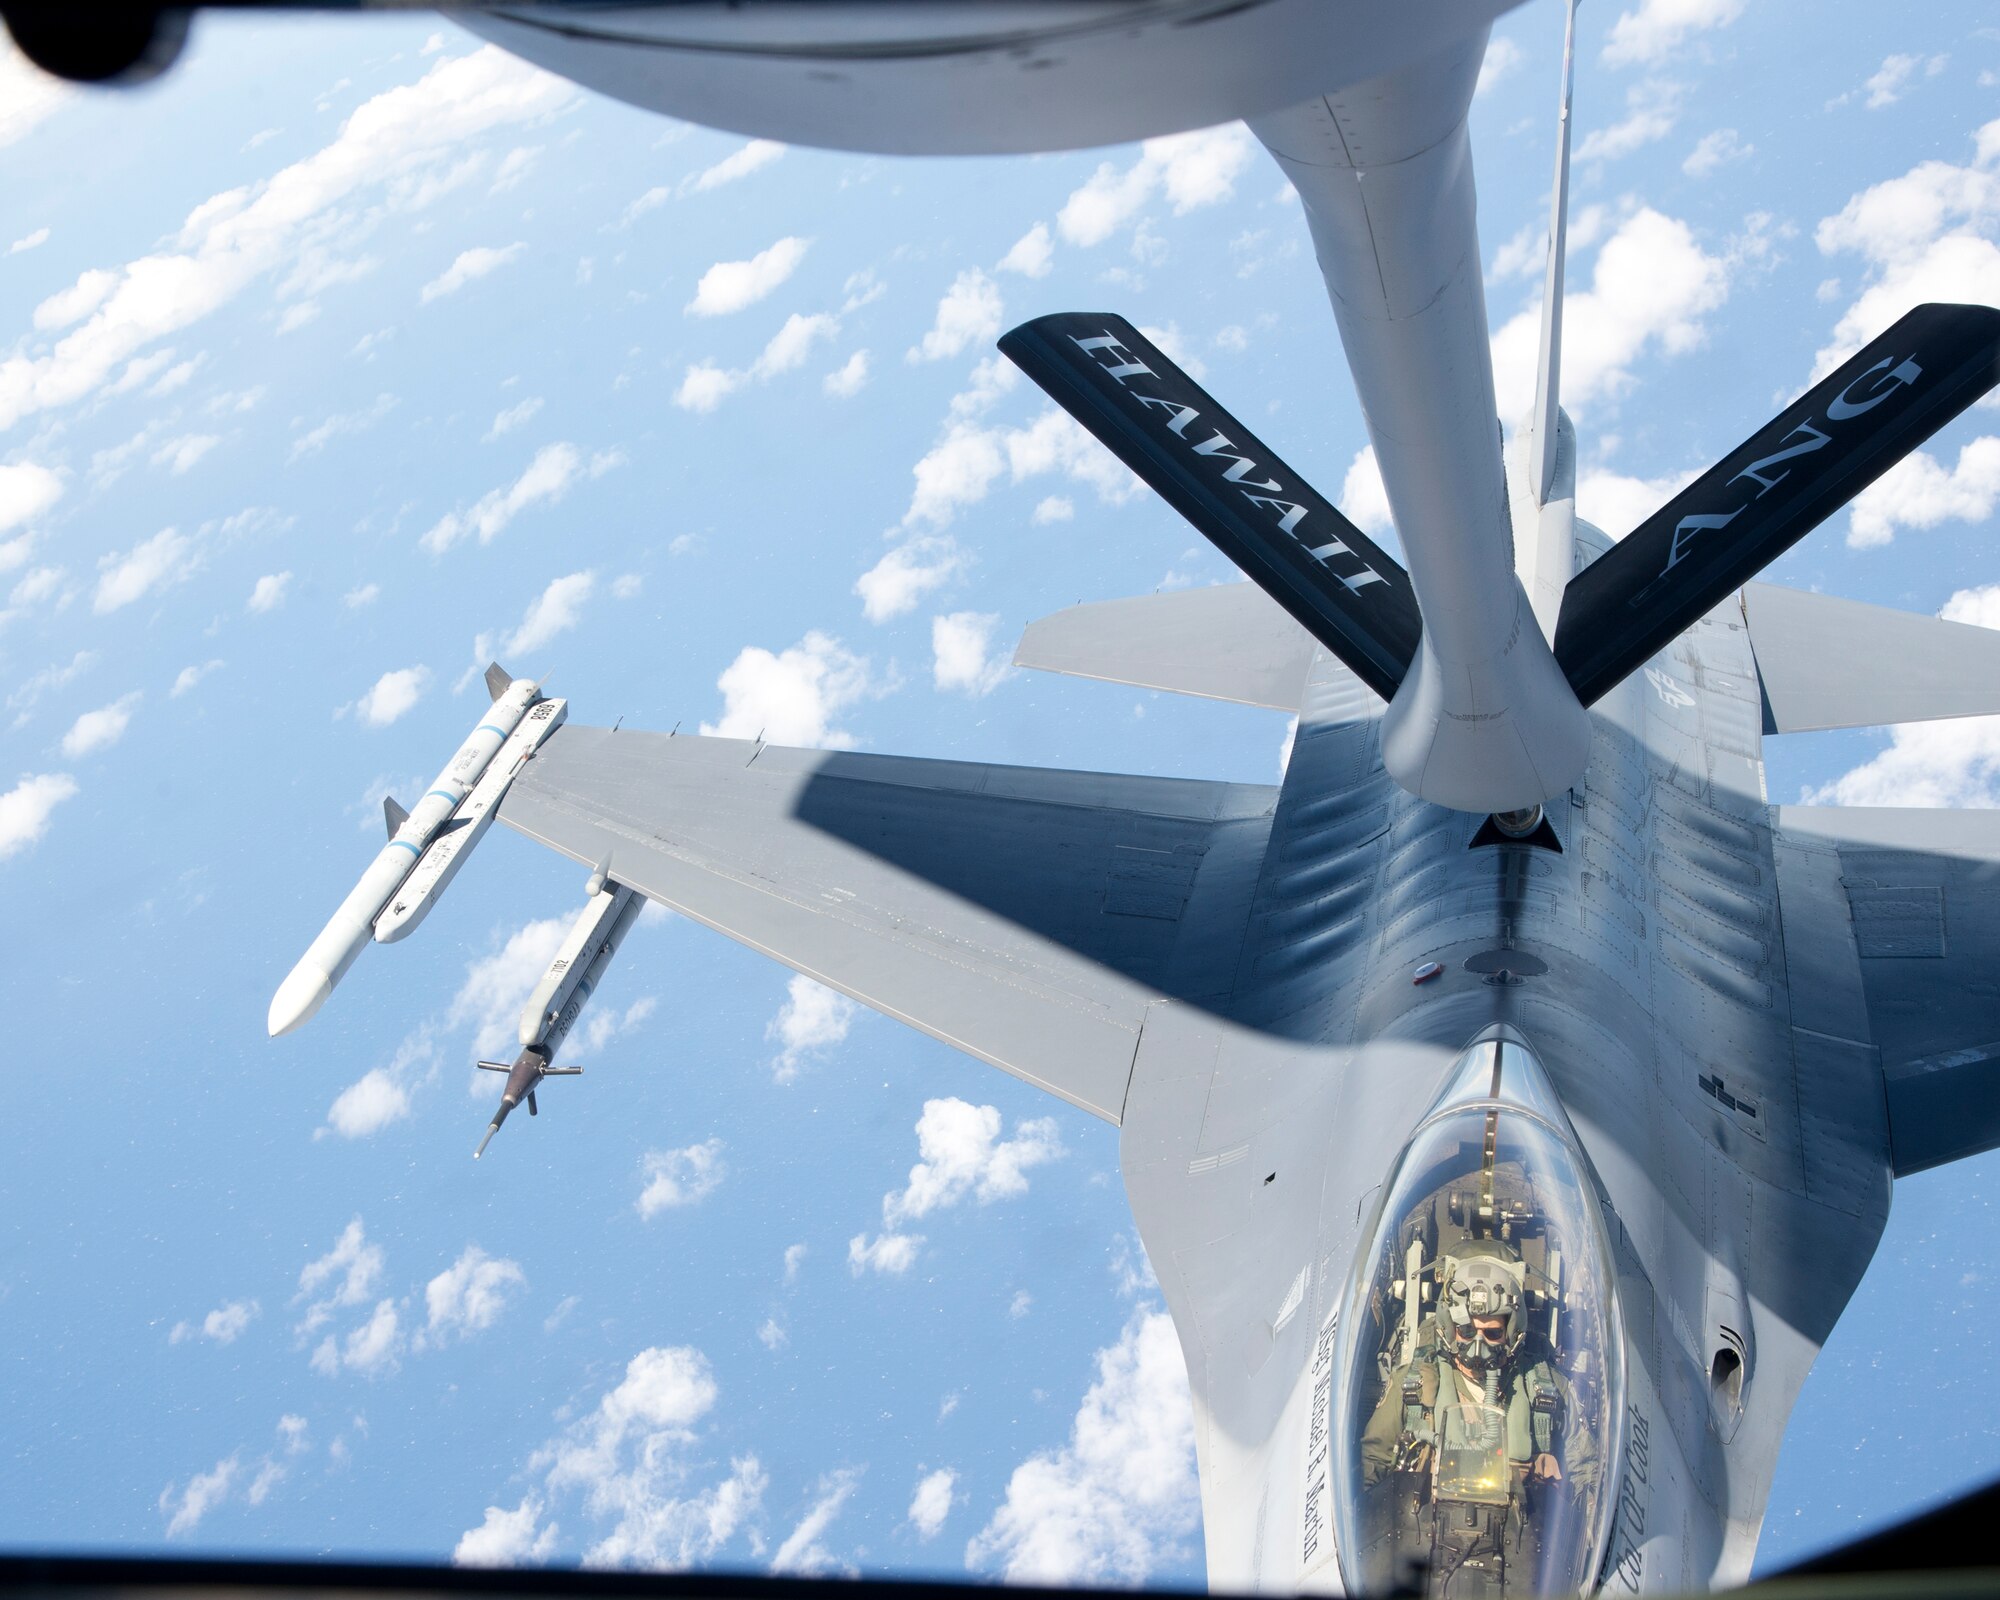 A U.S. Air Force F-16 Fighting Falcon from the 162nd Fighter Wing, Arizona Air National Guard, receives fuel from a KC-135R Stratotanker from the 96th Air Refueling Squadron, during the Hawaii Air National Guard exercises Sentry Aloha over Hawaii, March. 5, 2015. Sentry Aloha is the premier and primary training exercise to prepare multiple elements of the Air National Guard in the mission of homeland defense. (U.S. Air Force photo by Tech. Sgt. Aaron Oelrich/Released)